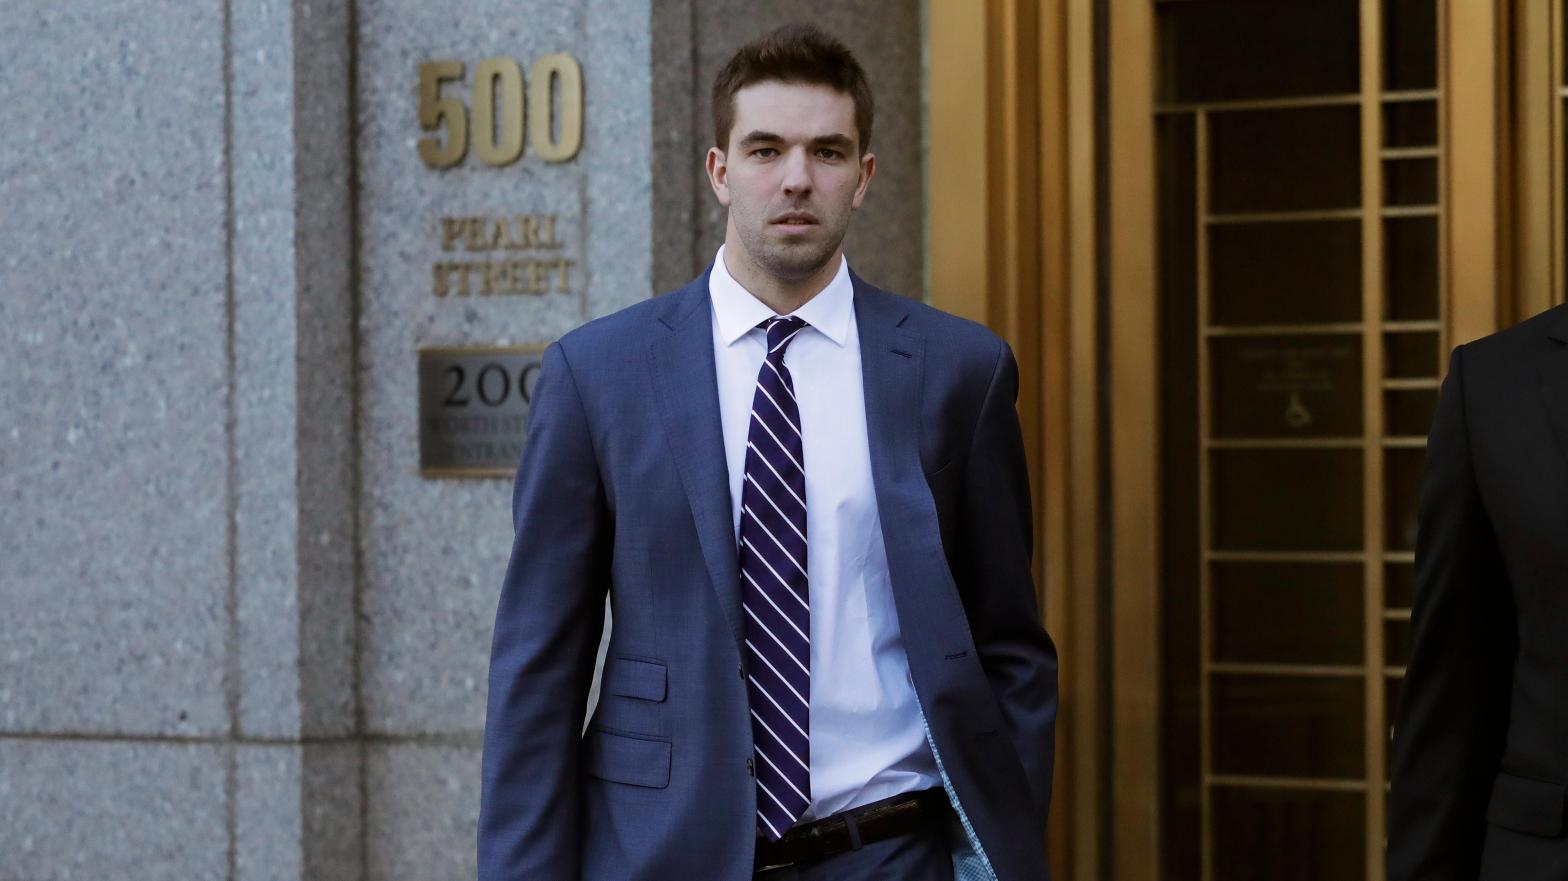 McFarland and others reportedly defrauded investors $US27.4 ($38) million in a bid to host Fyre Festival in The Bahamas. (Image: Mark Lennihan, AP)